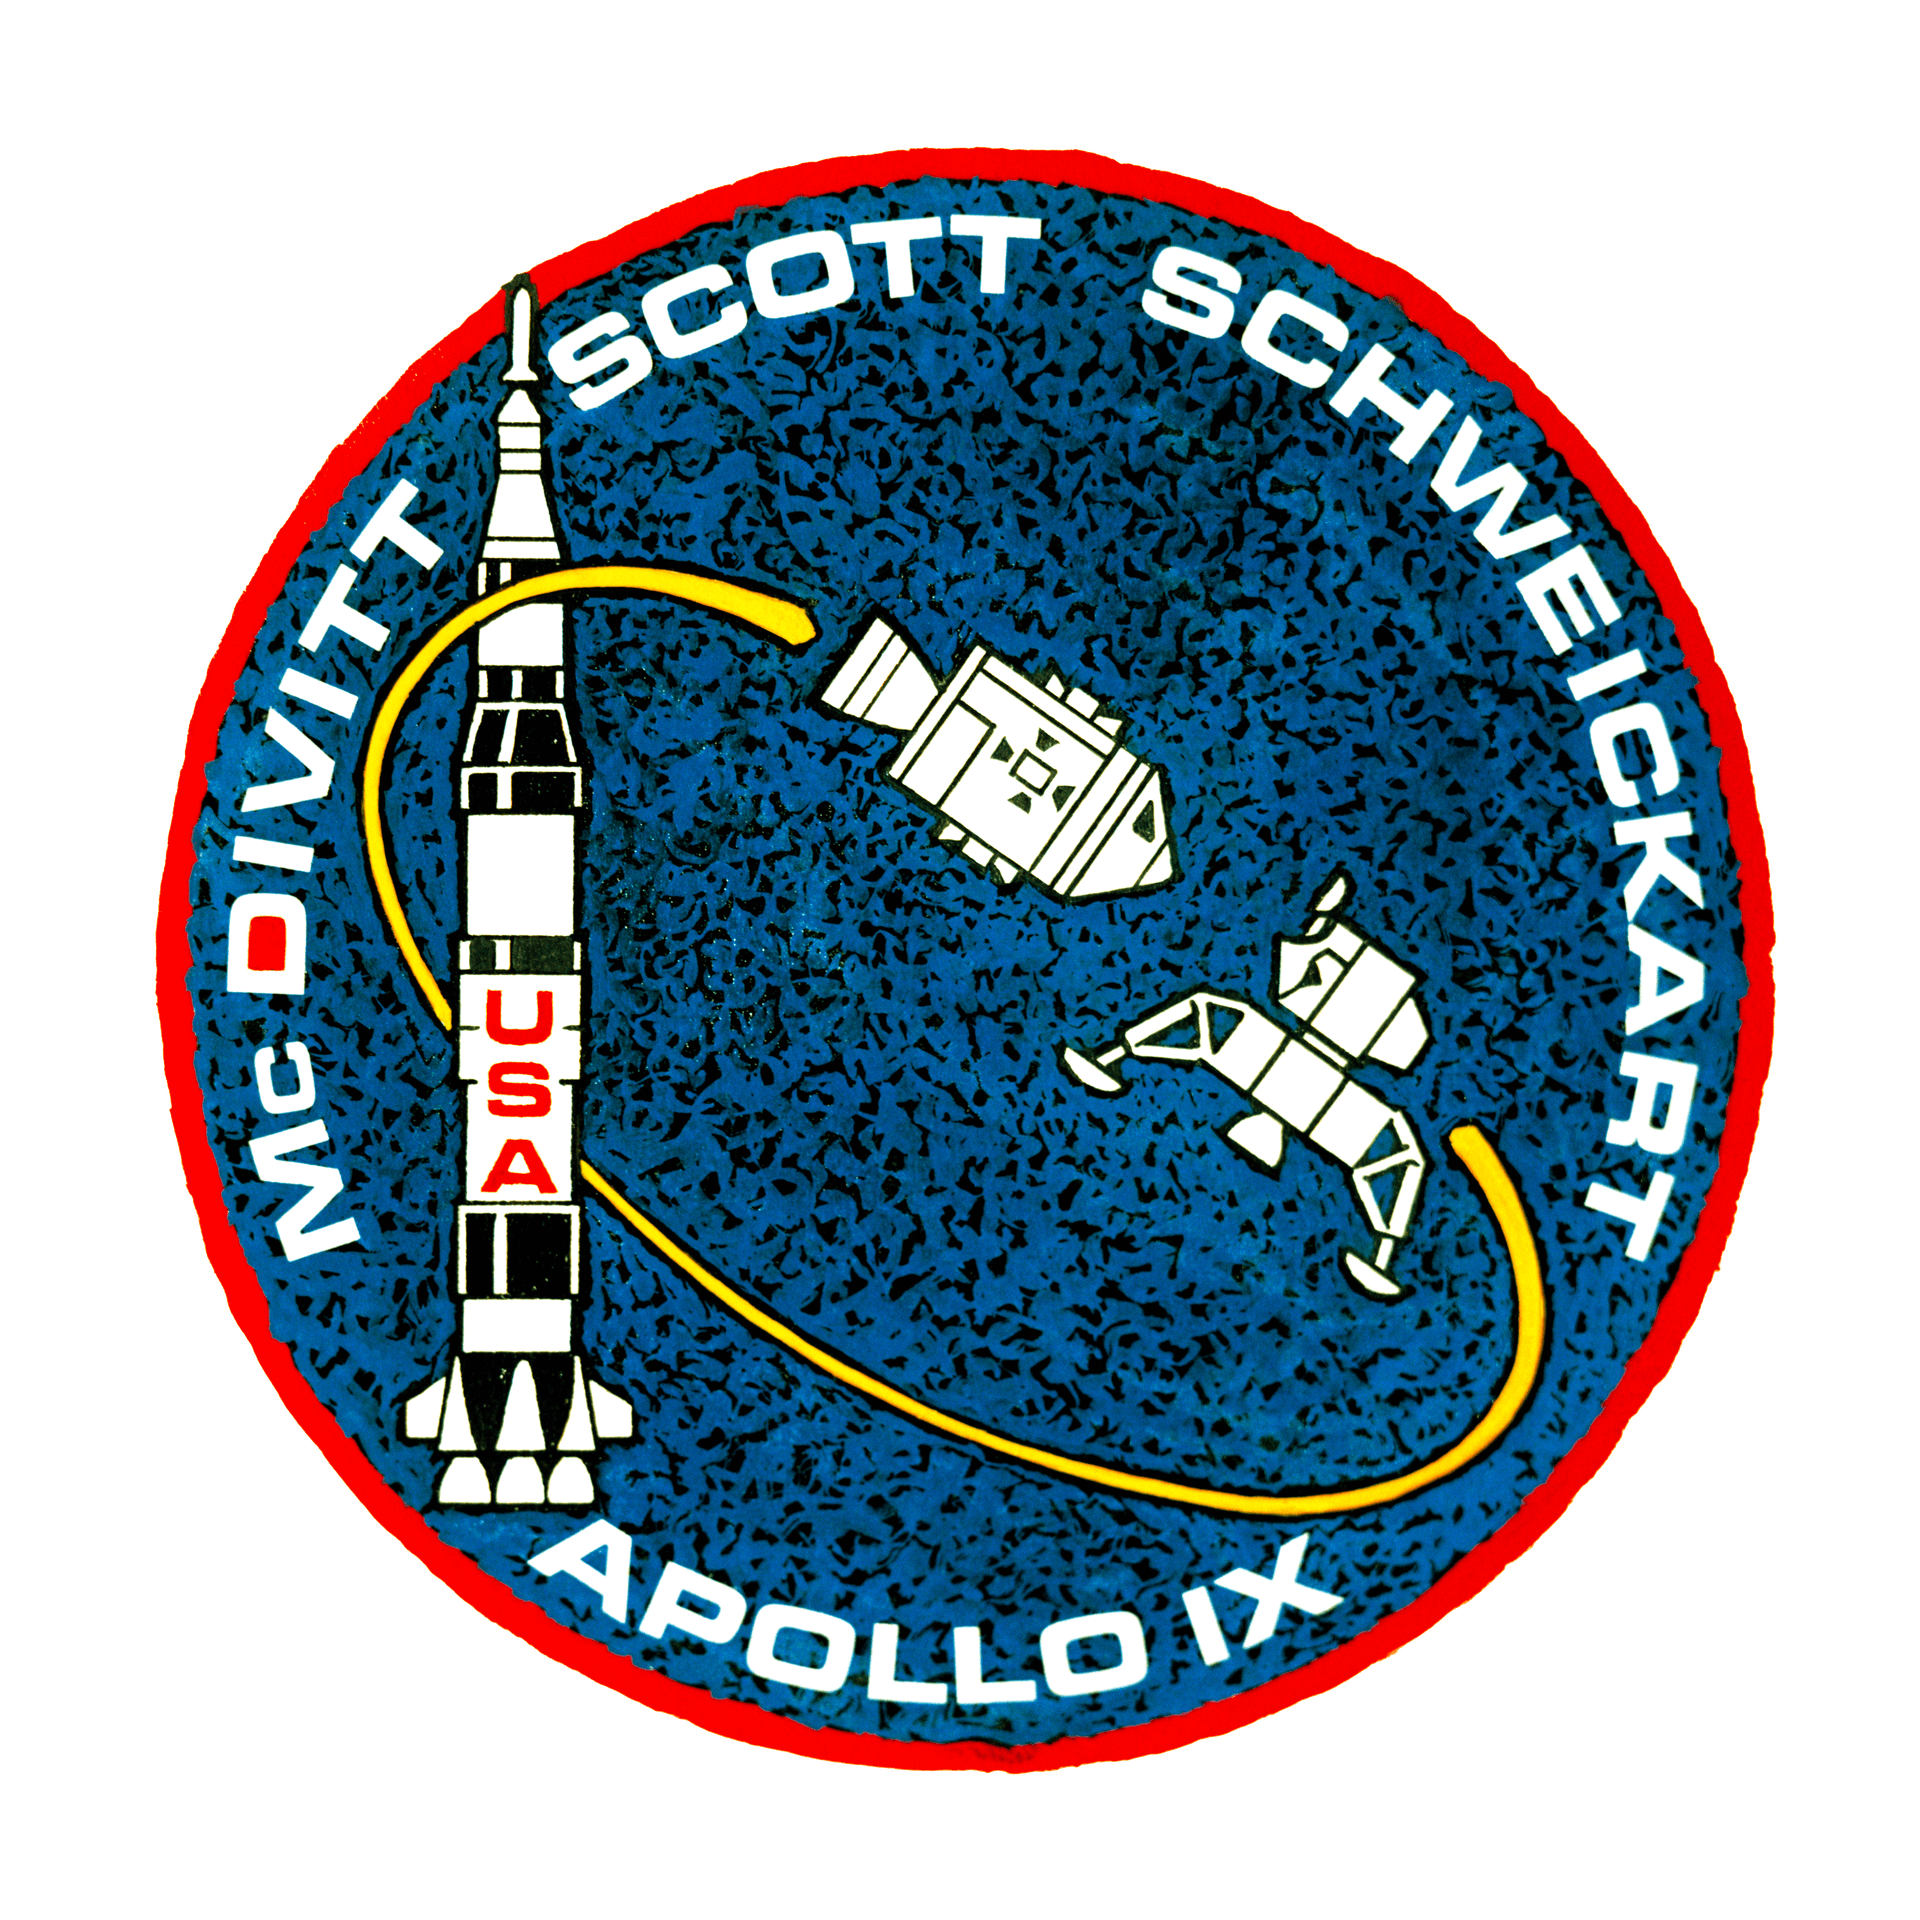 Mission patch for Apollo 9